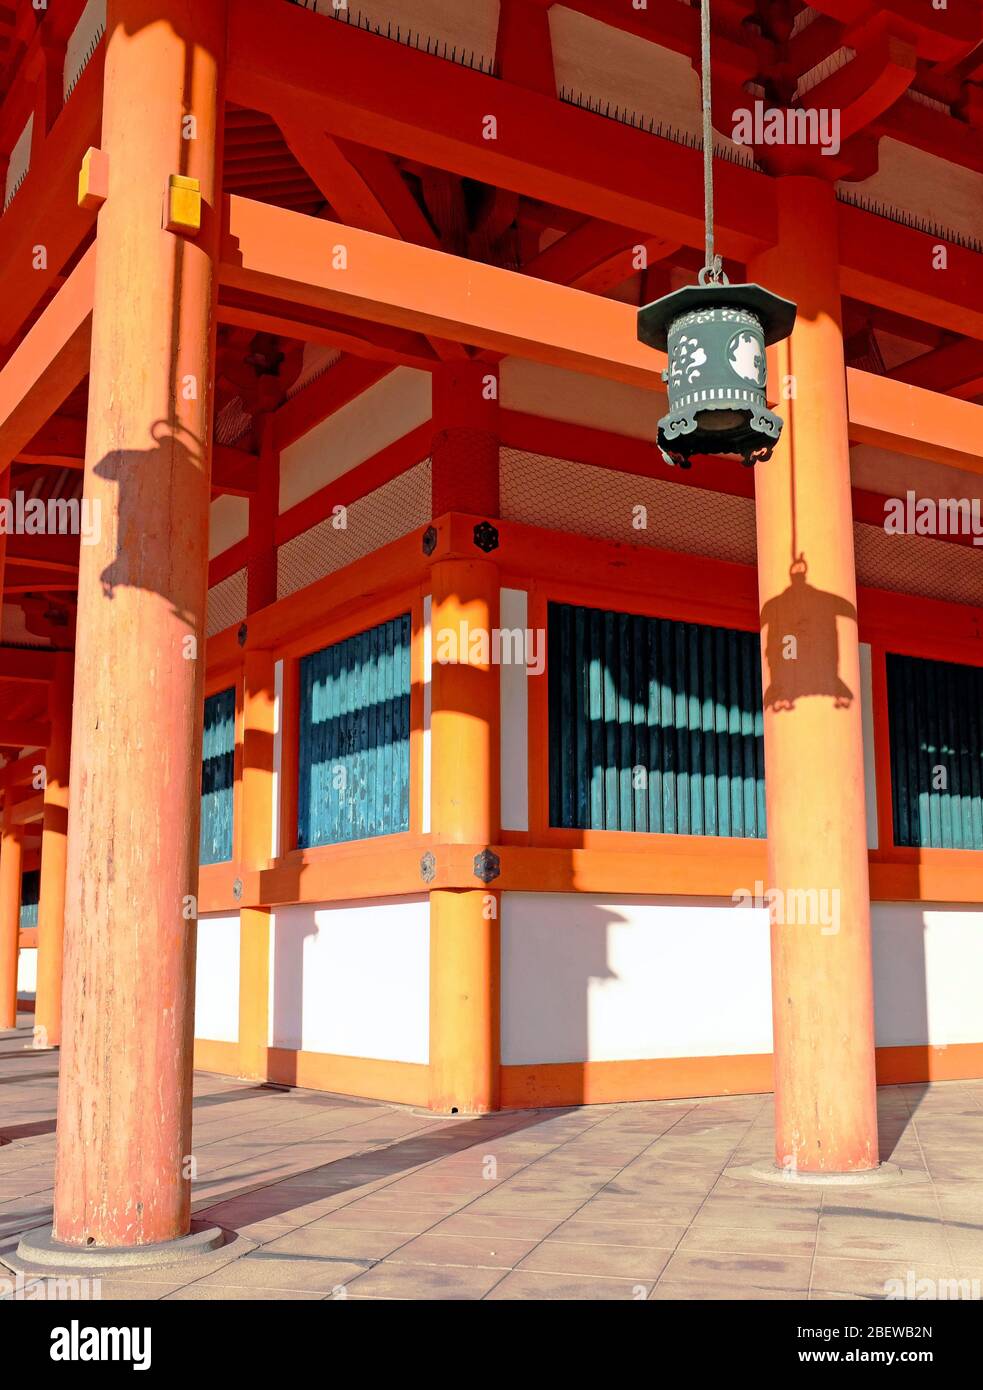 Tranquil Japanese setting in which old hanging Japanese lanterns cast shadows on the orange and green building in Kyoto, Japan. Stock Photo